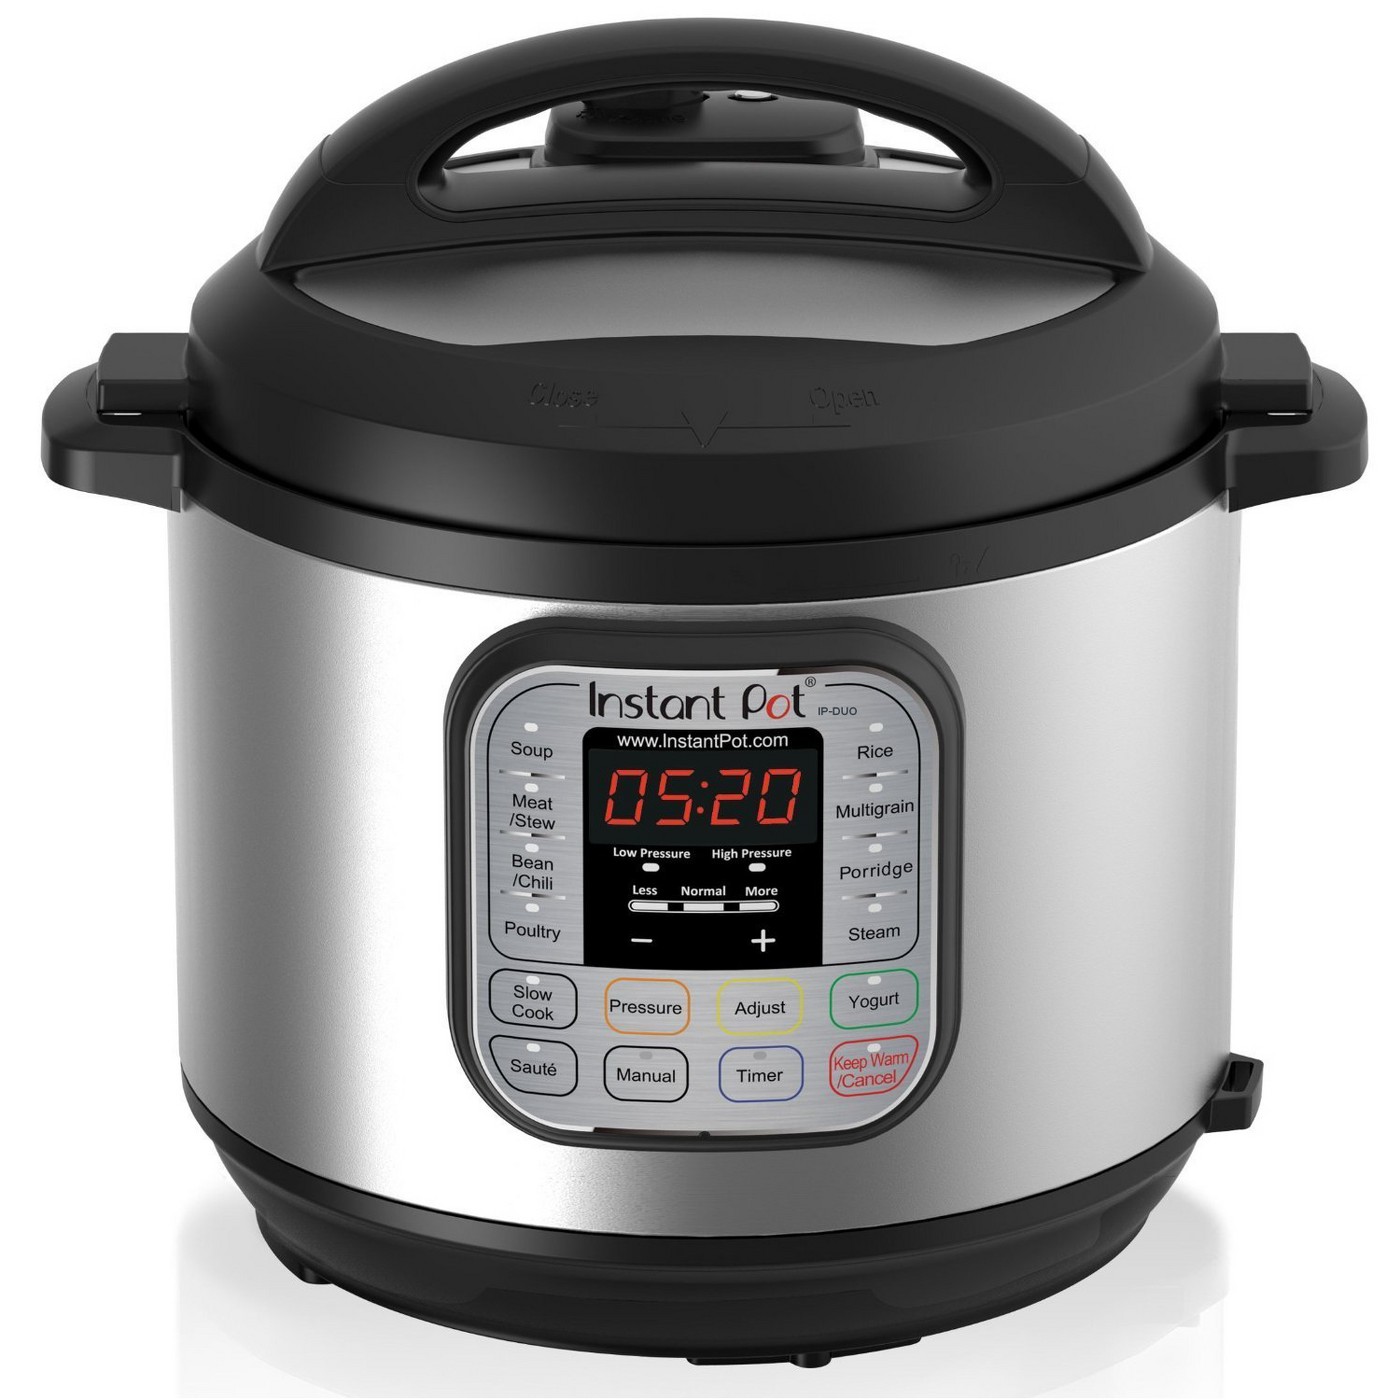 Instant Pot Duo 6qt 7 in 1 Pressure Cooker - image 1 of 5